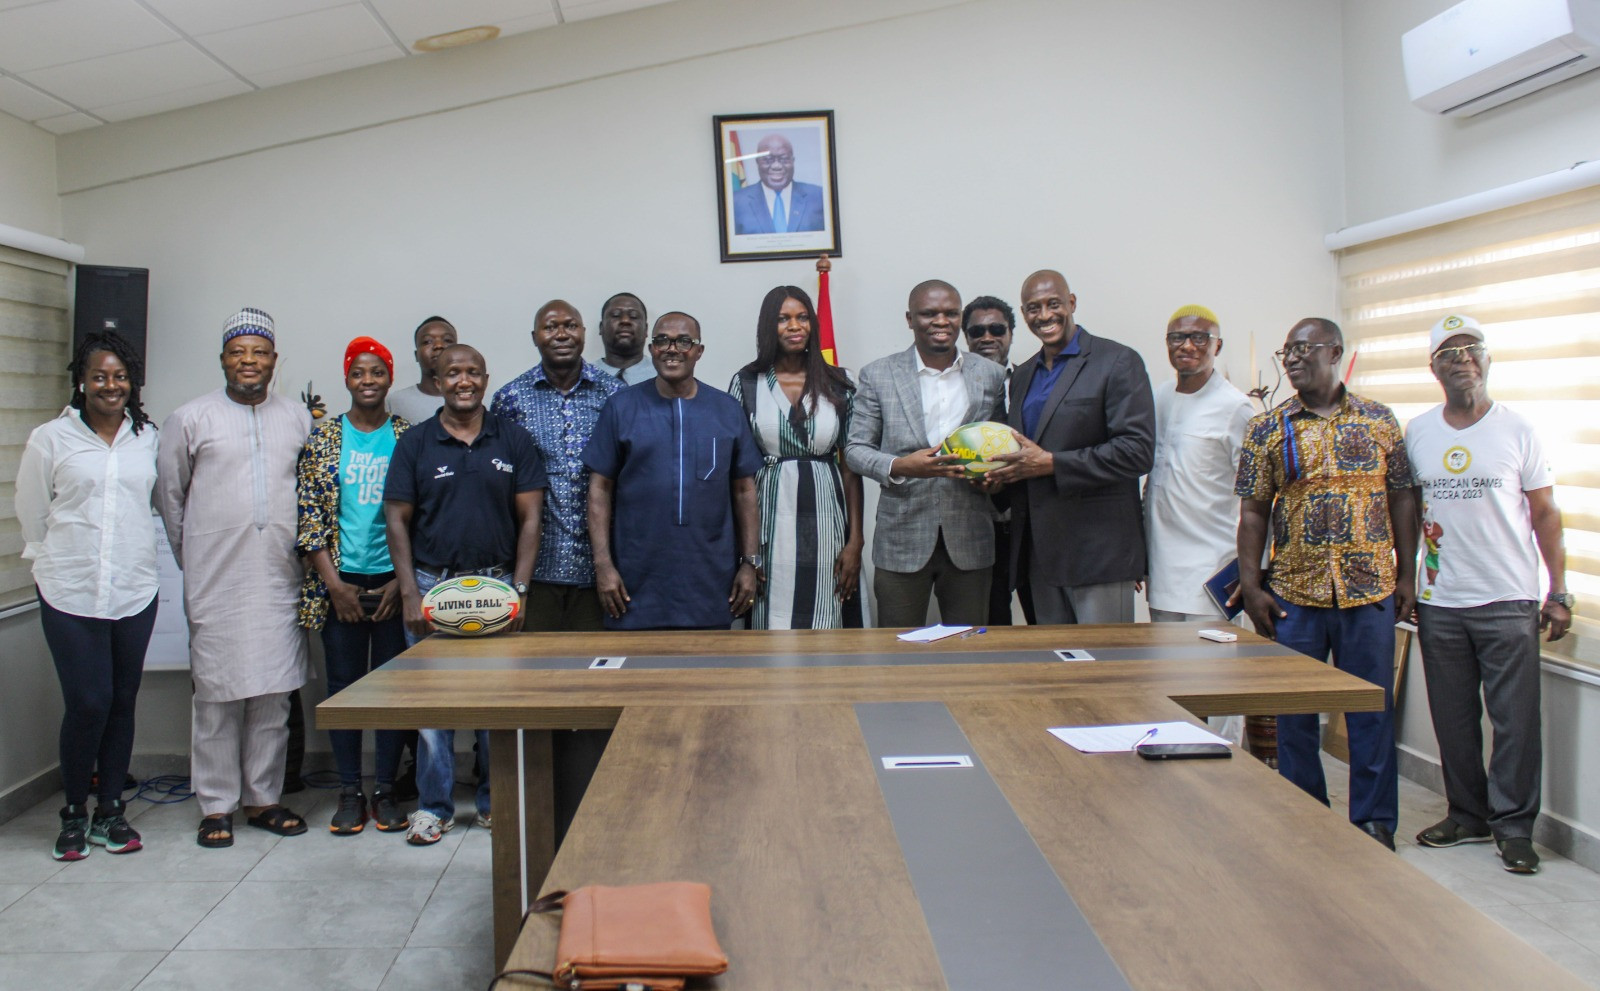 Rugby Africa sent a multi-national delegation to Accra to view progress in constructing the new rugby stadium for the African Games ©Rugby Africa